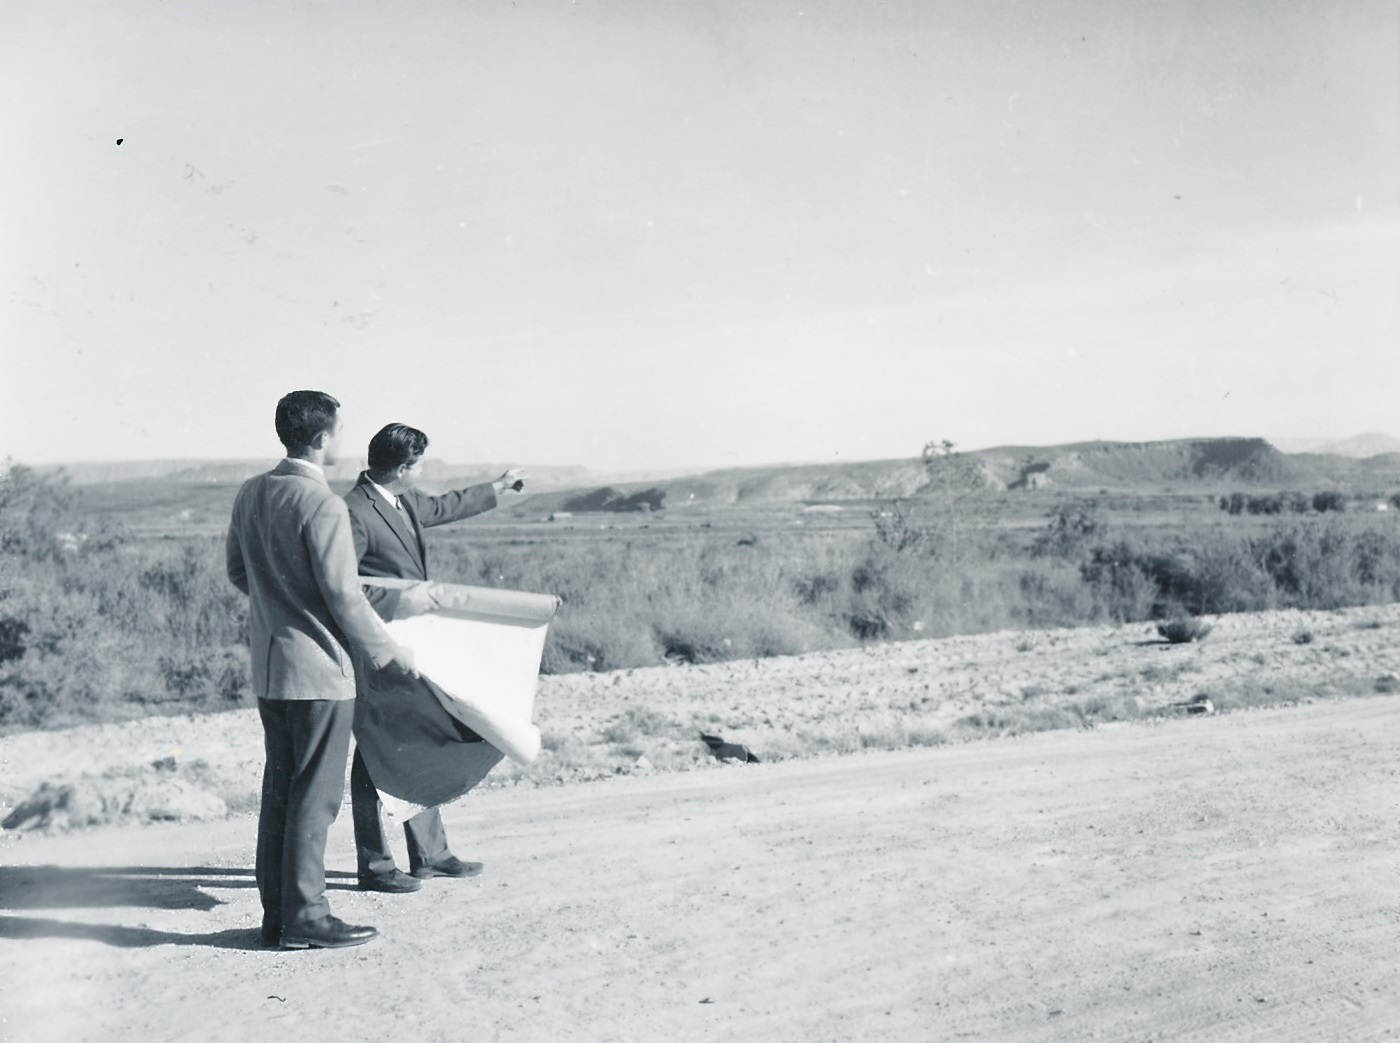 Two men examining some property in St. George